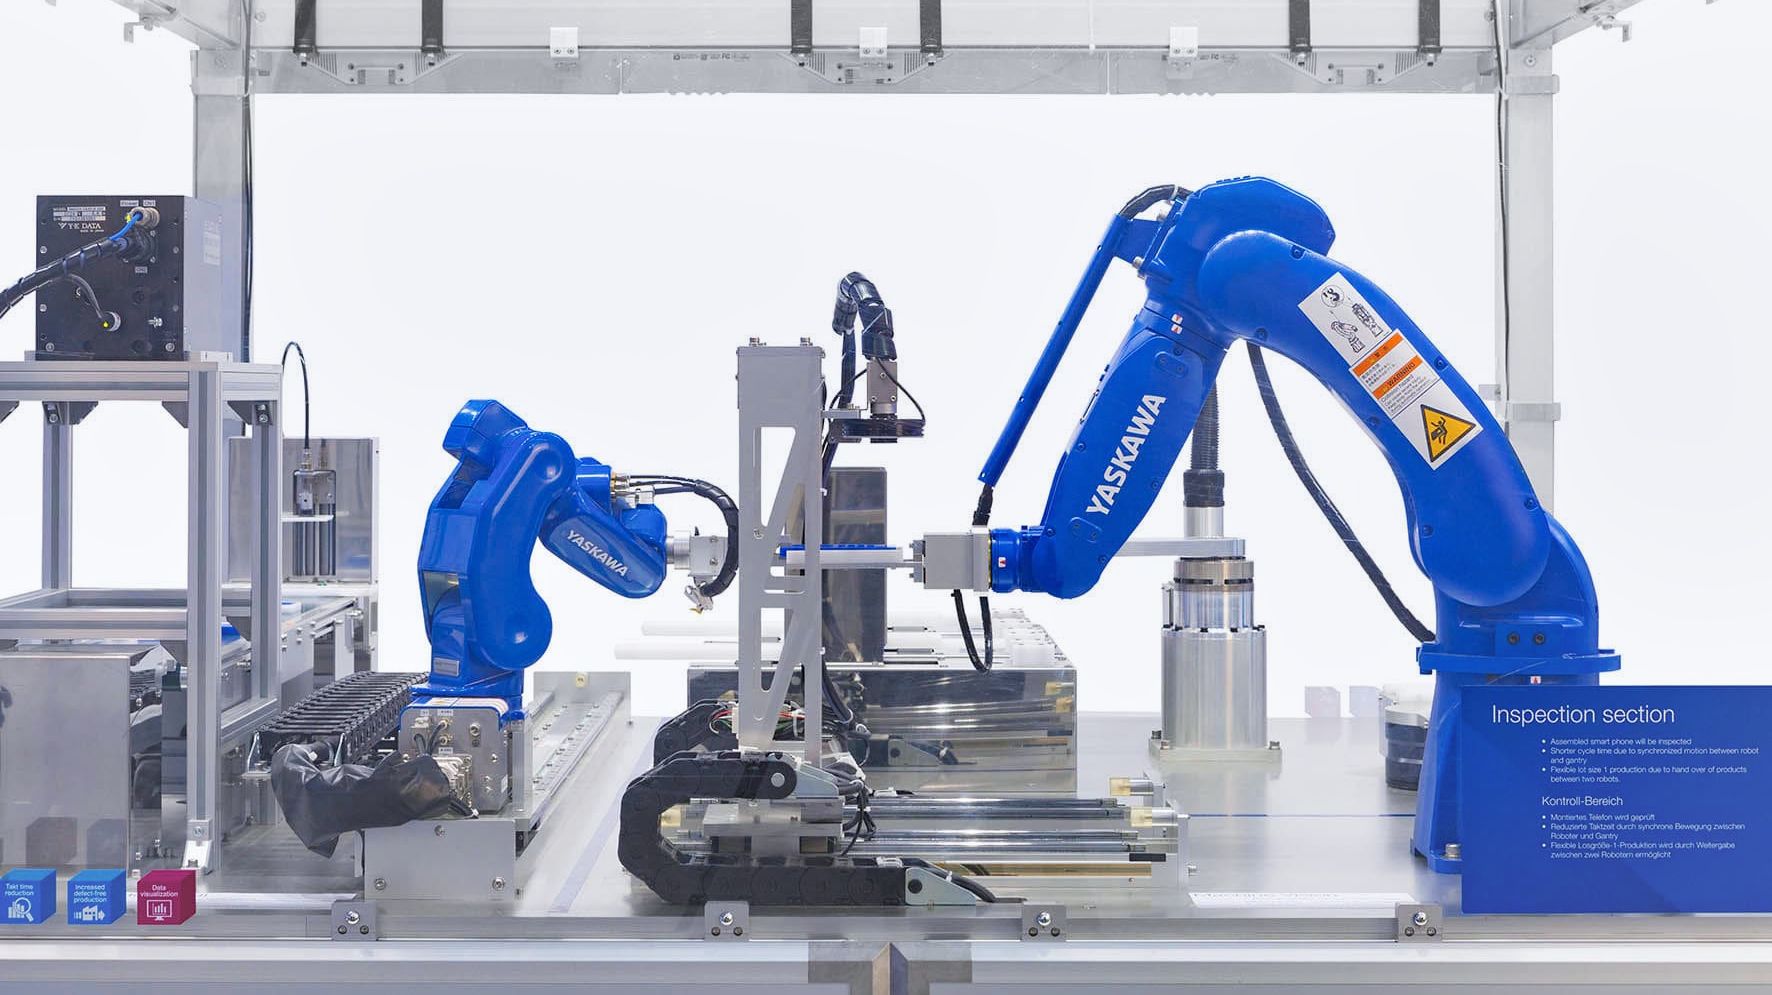 10 Industrial Robot Companies That Lead the Industry - RoboDK blog